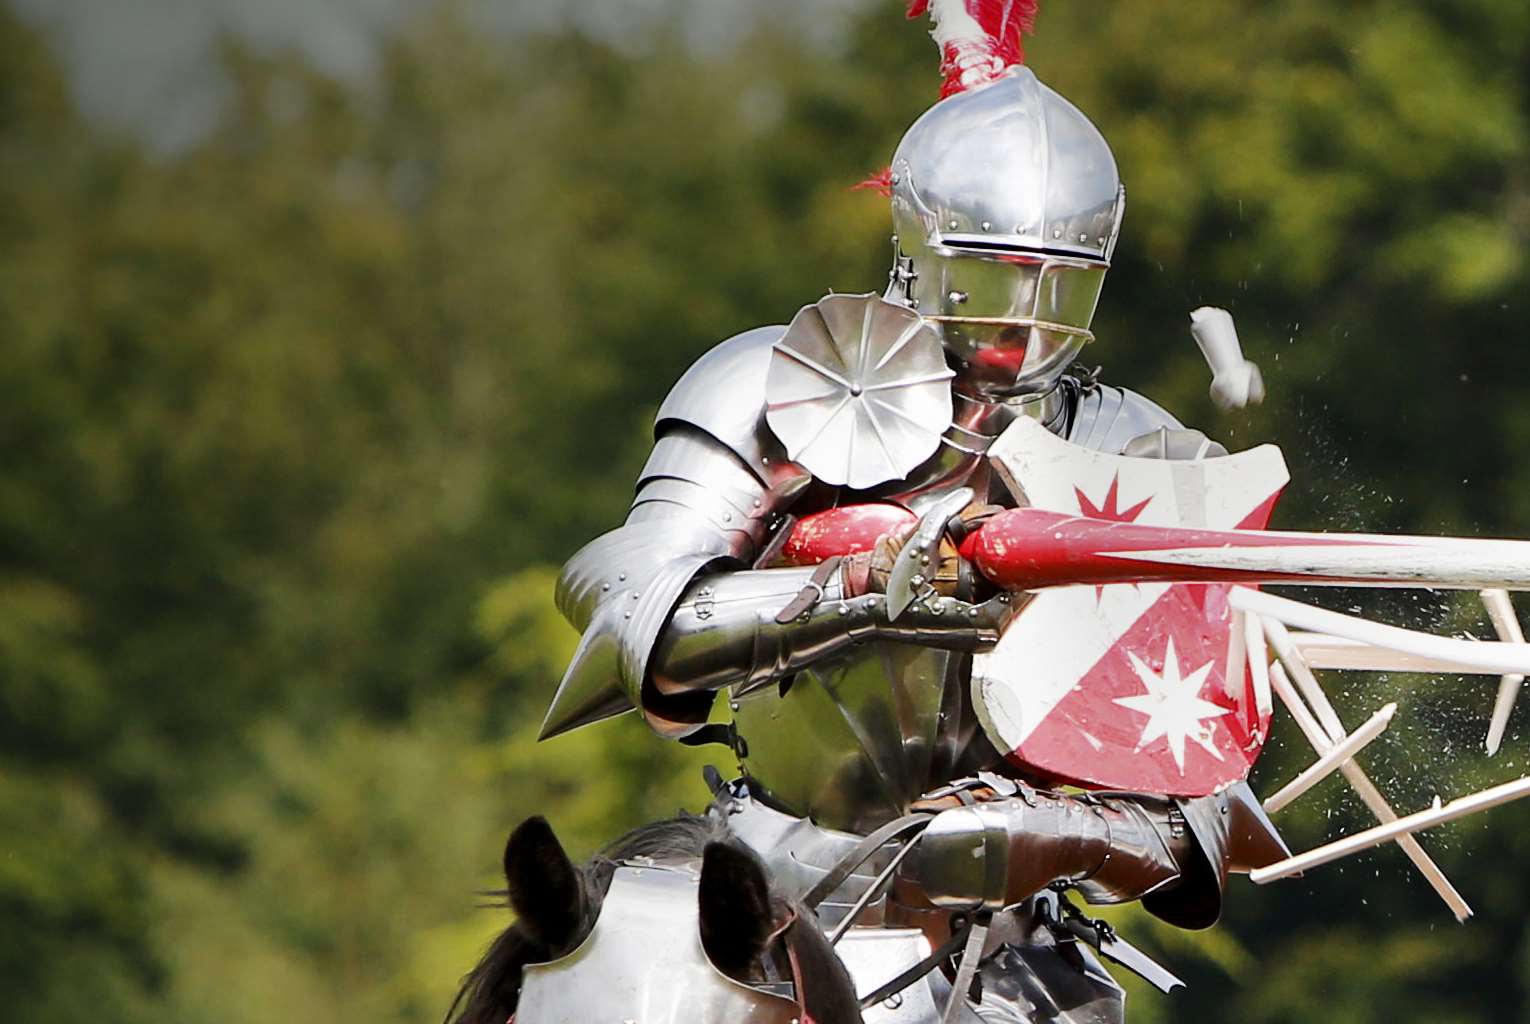 There's jousting fun over the bank holiday weekend at Leeds Castle near Maidstone